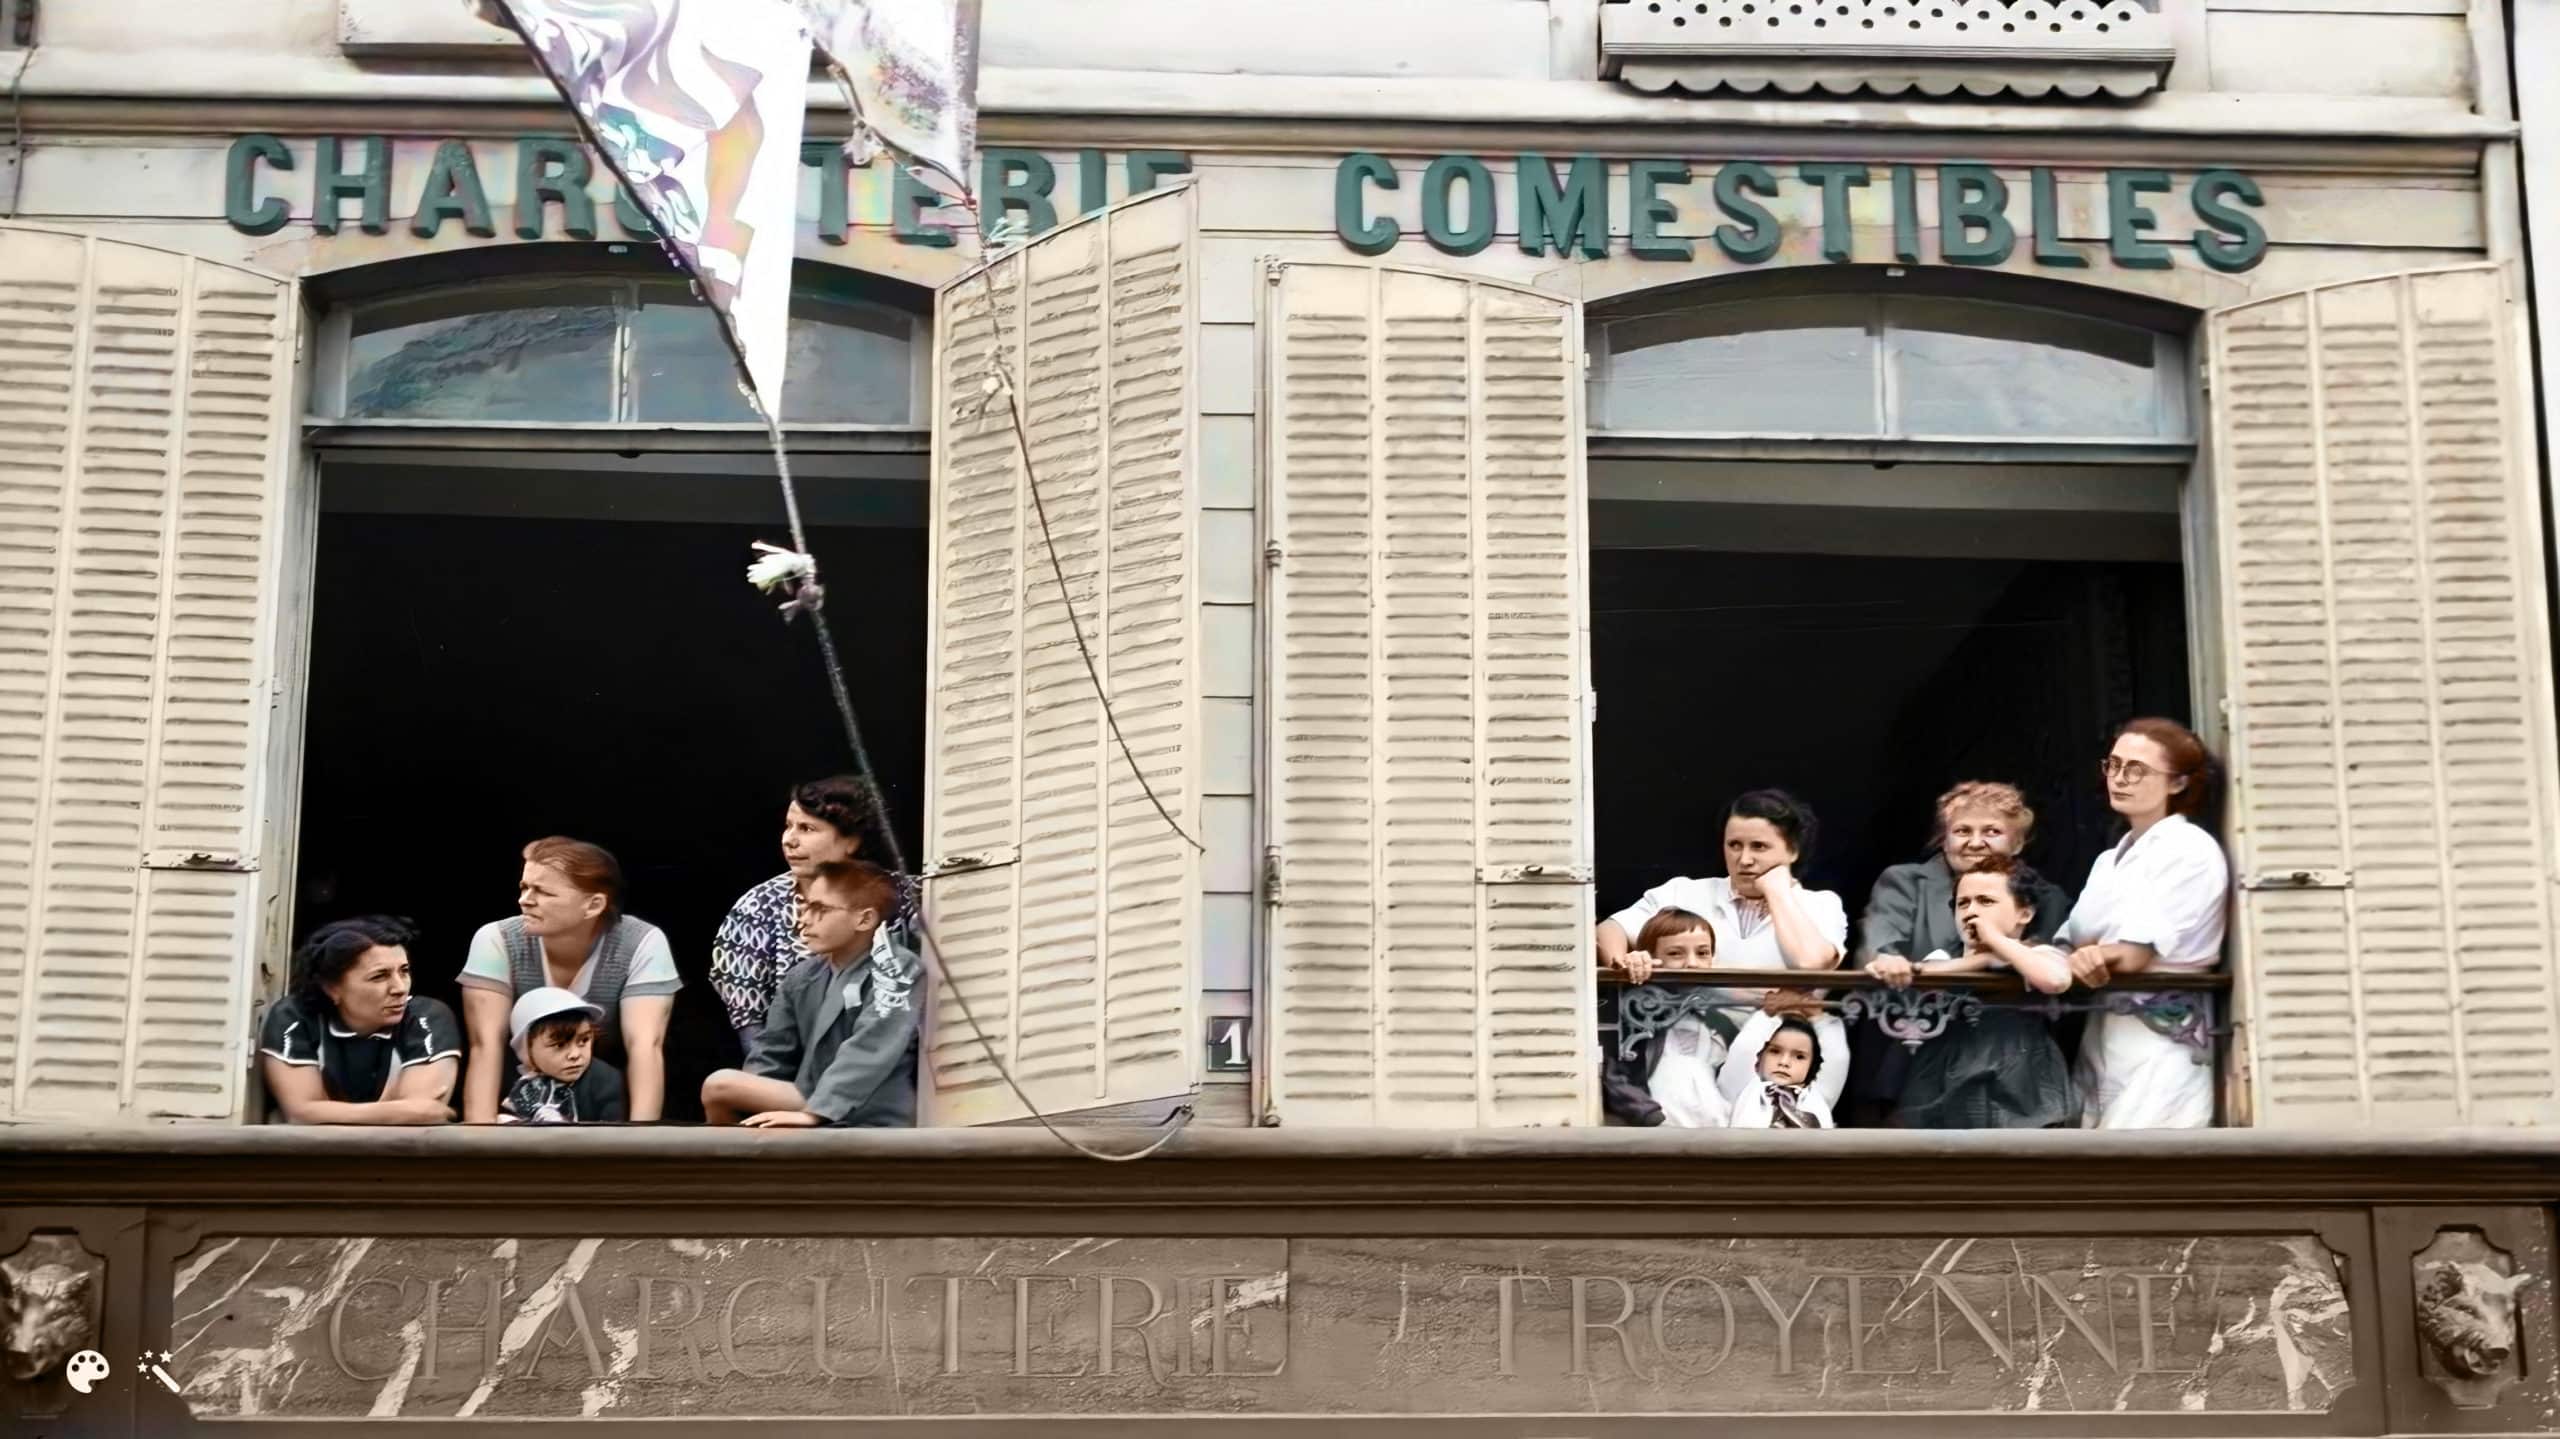 Pierre Boillon and his family watch as the Tour de France passes by their business in Bar-sur-Aube. Photo courtesy of Pierre Boillon, colorized and enhanced by MyHeritage